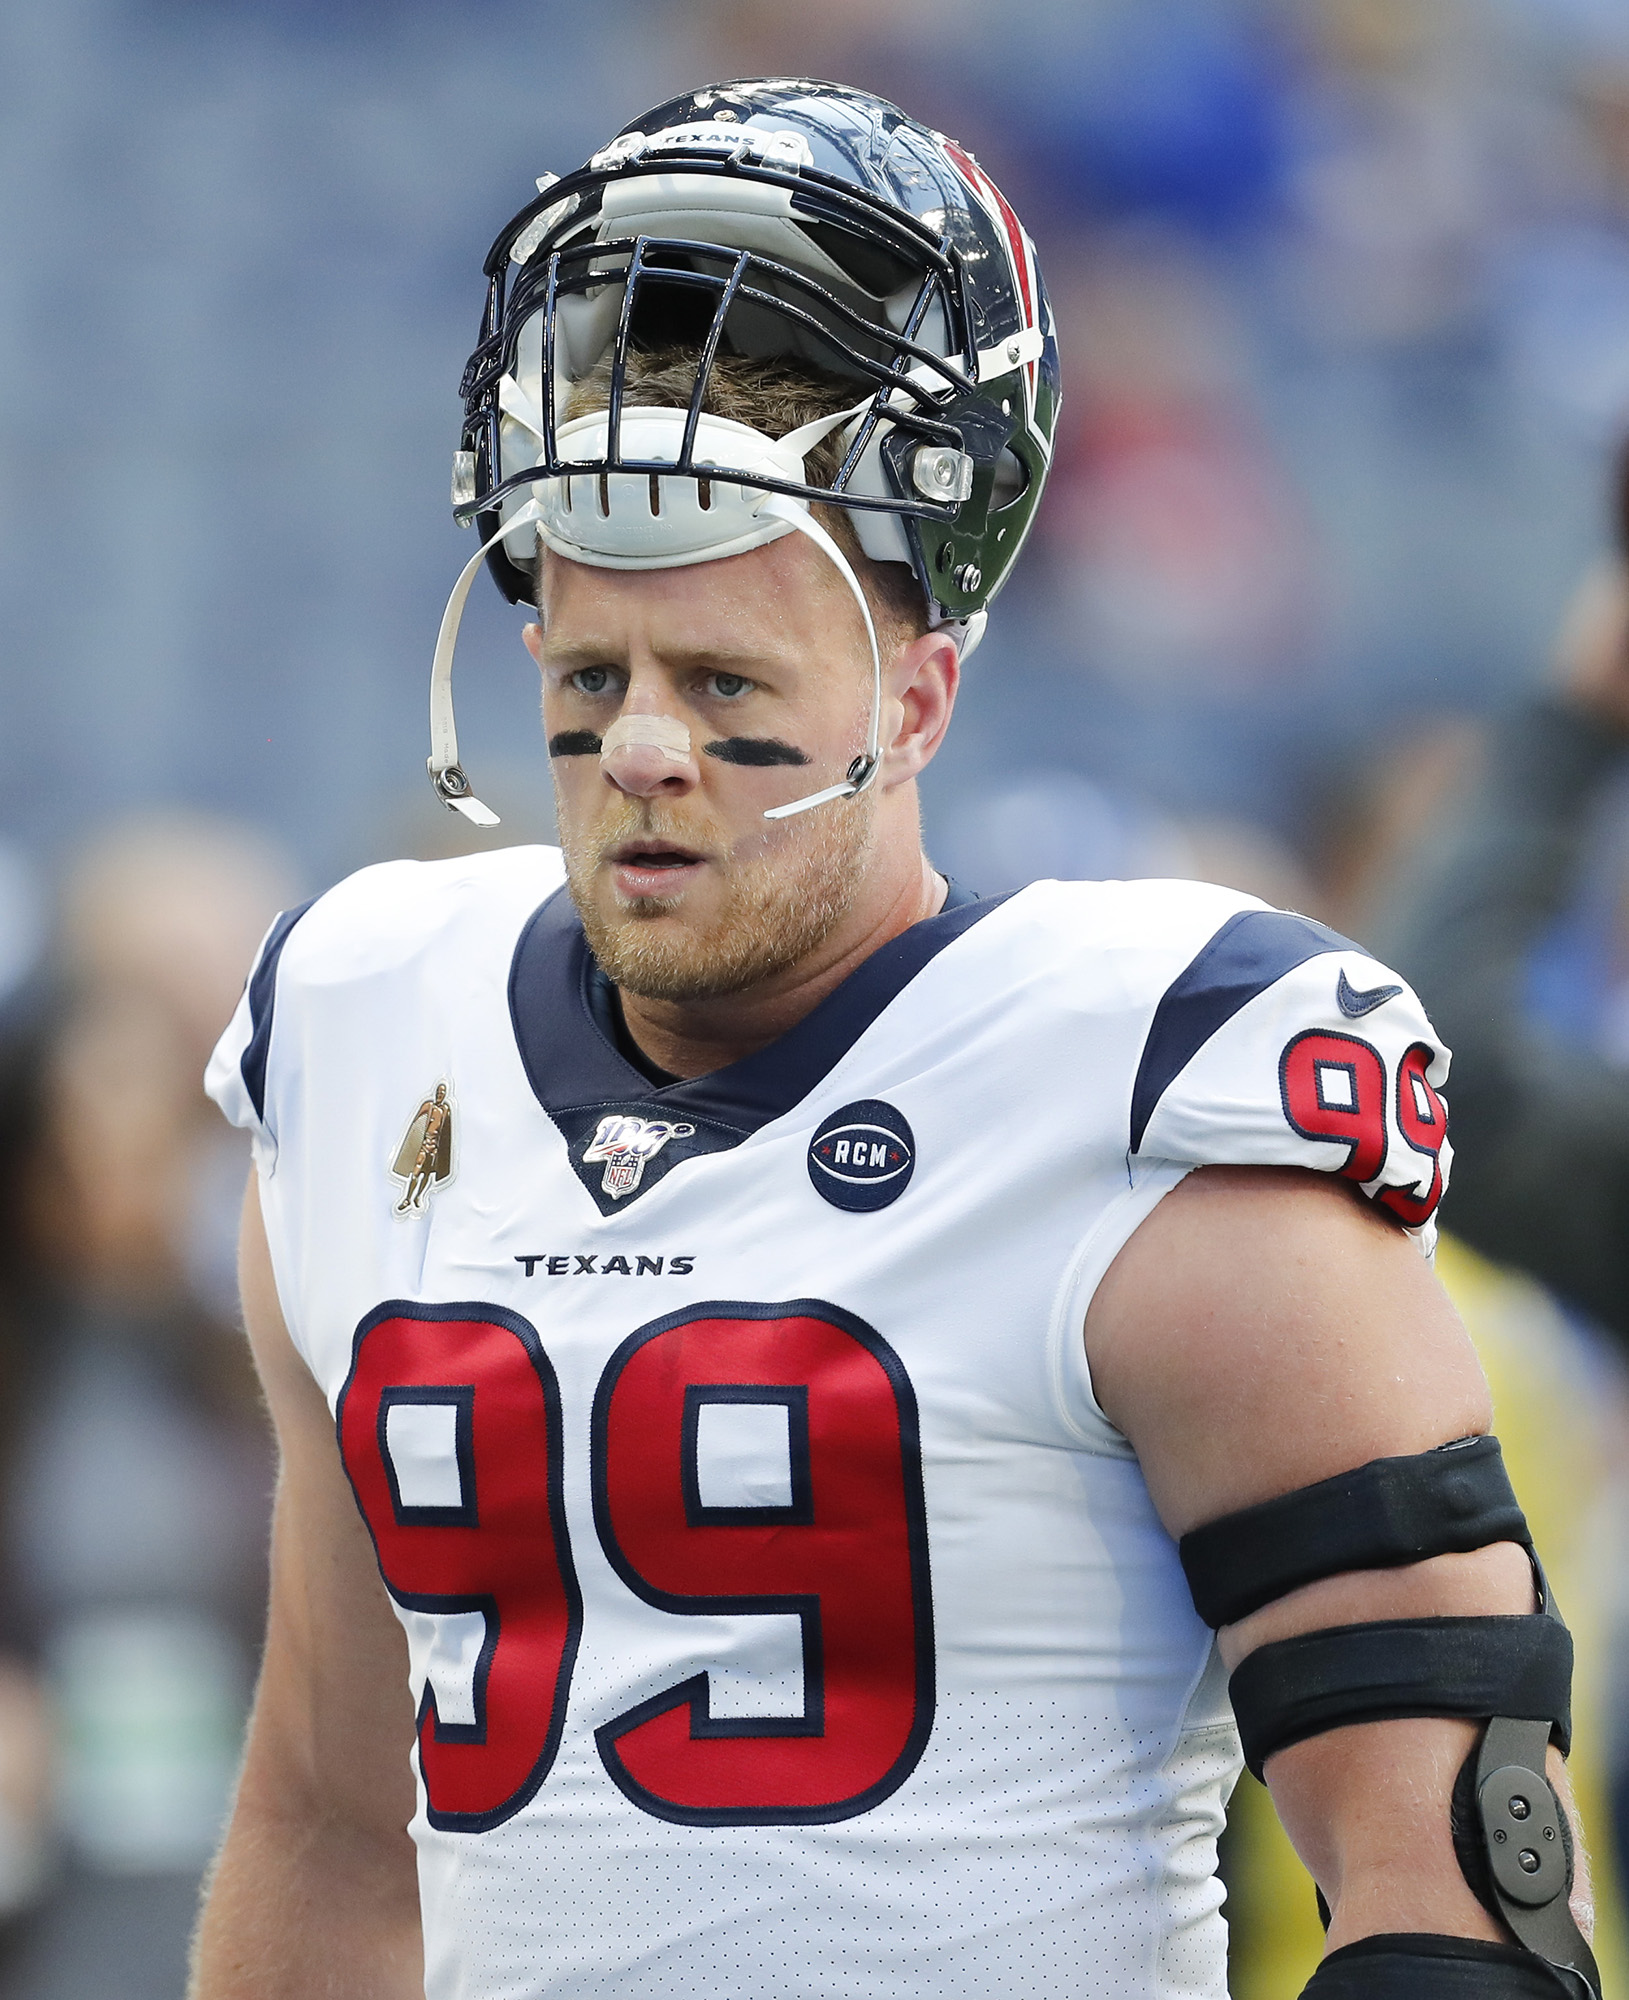 A football player wears a white jersey with the number 99 and the word "Texans" in front of it. He wears his helmt on top of his head, exposing his face.